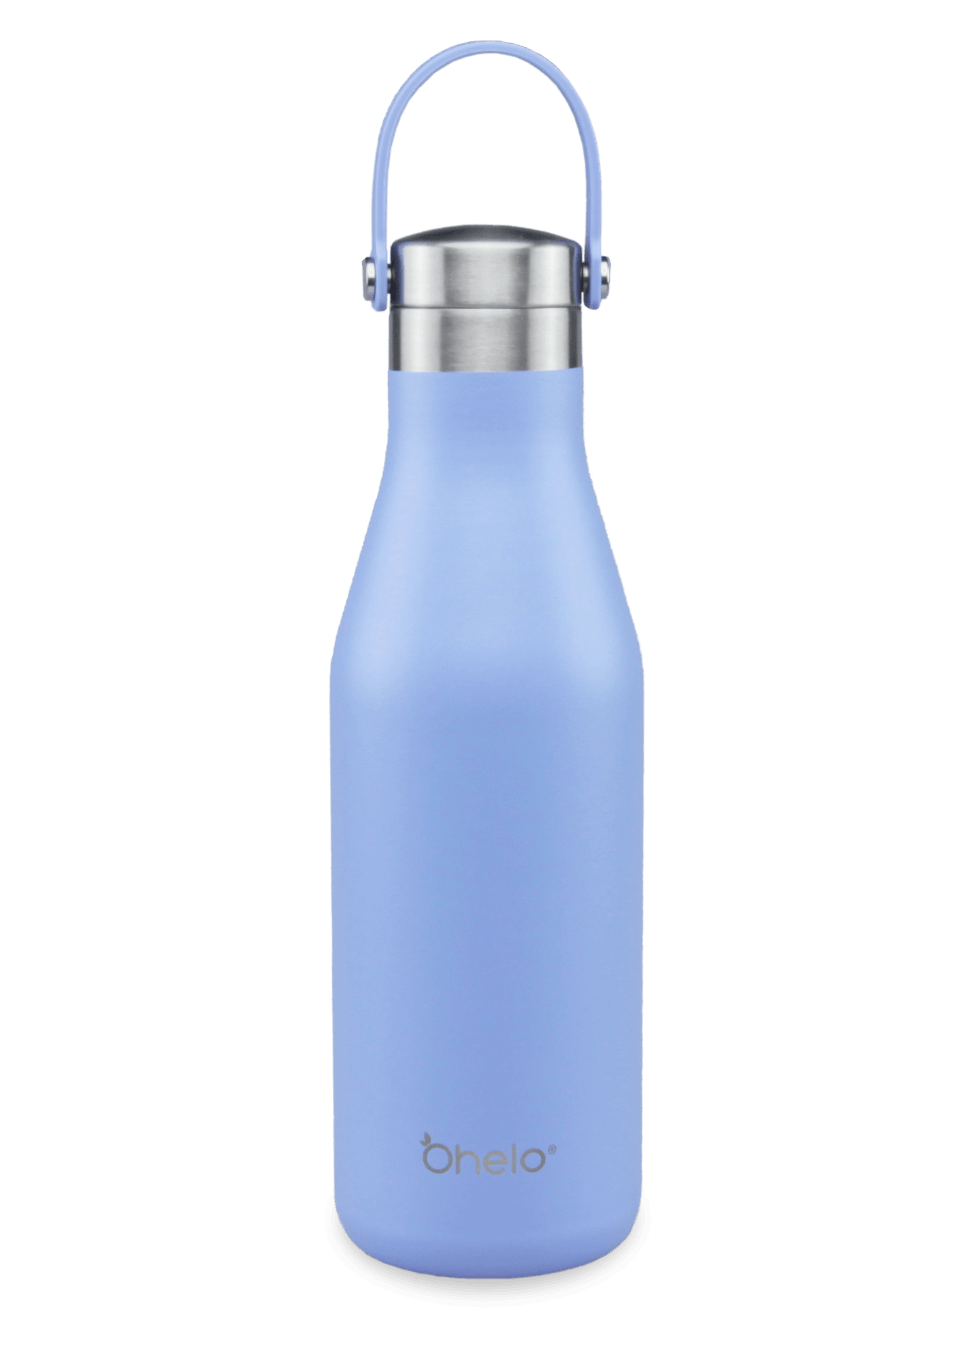 Ohelo blue reusable insulated stainless steel bottle 